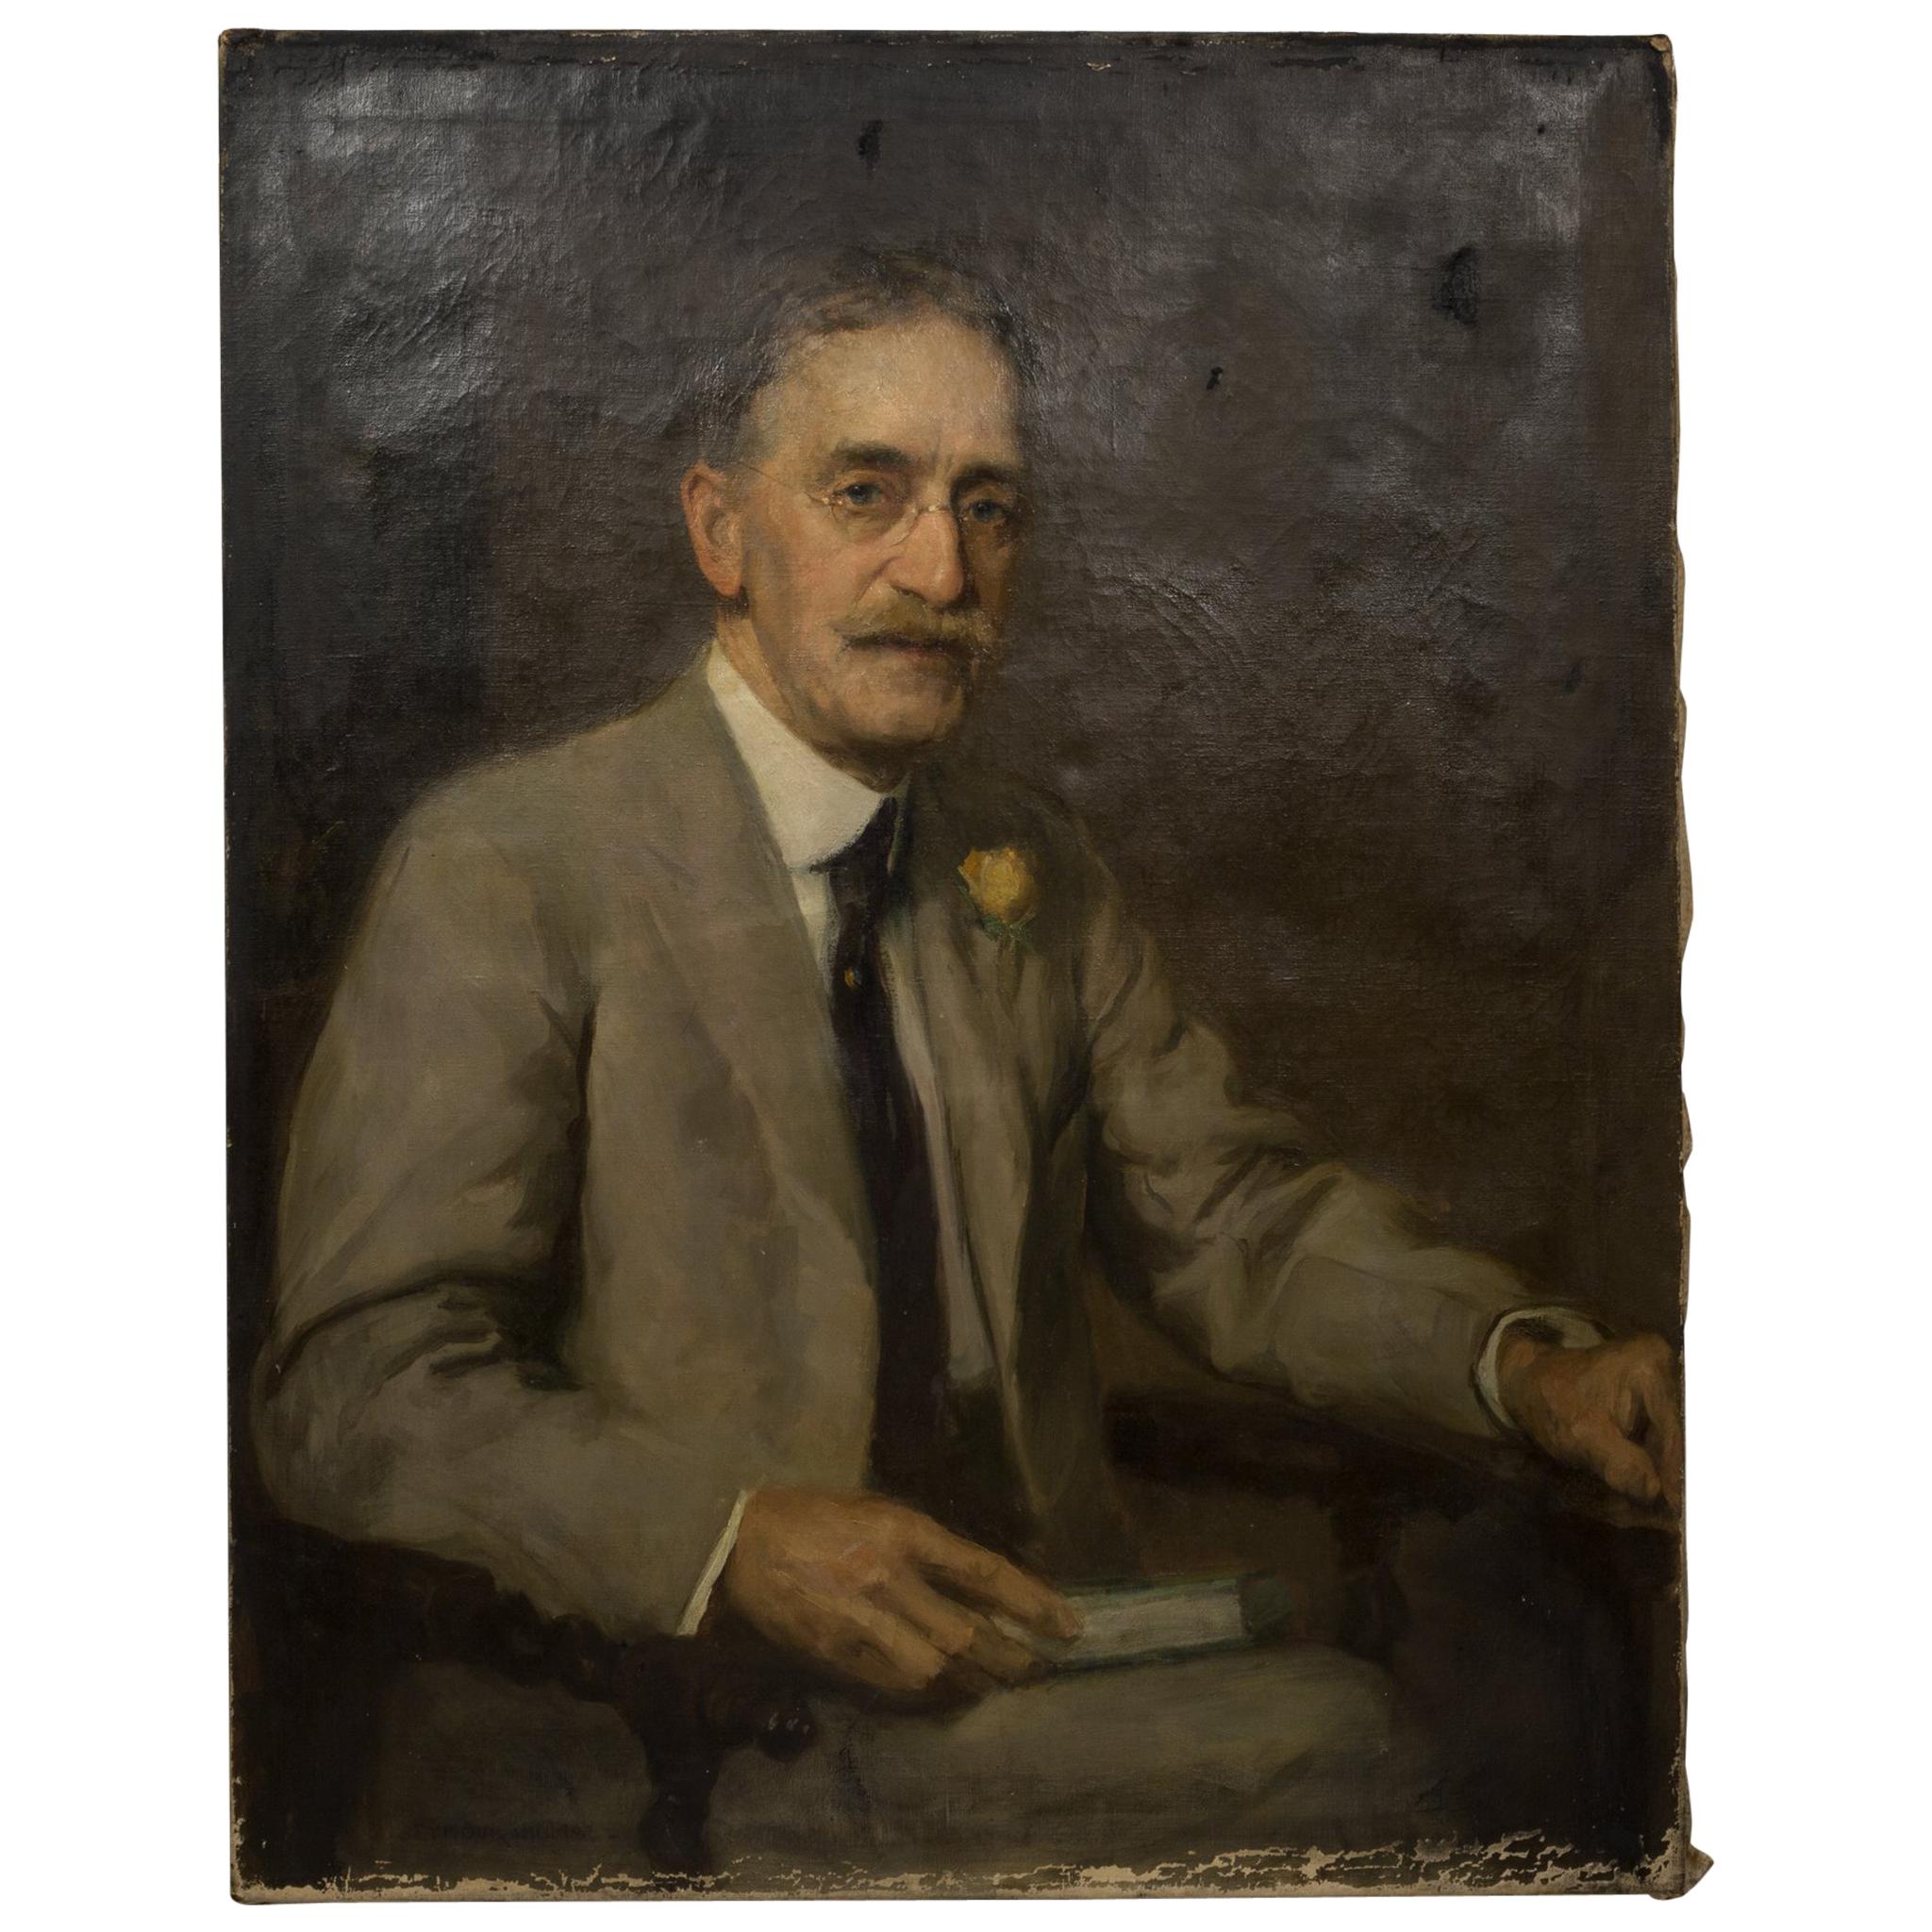 "Dr. Fowler" Oil on Canvas Portrait by S.Seymour Thomas, circa 1900